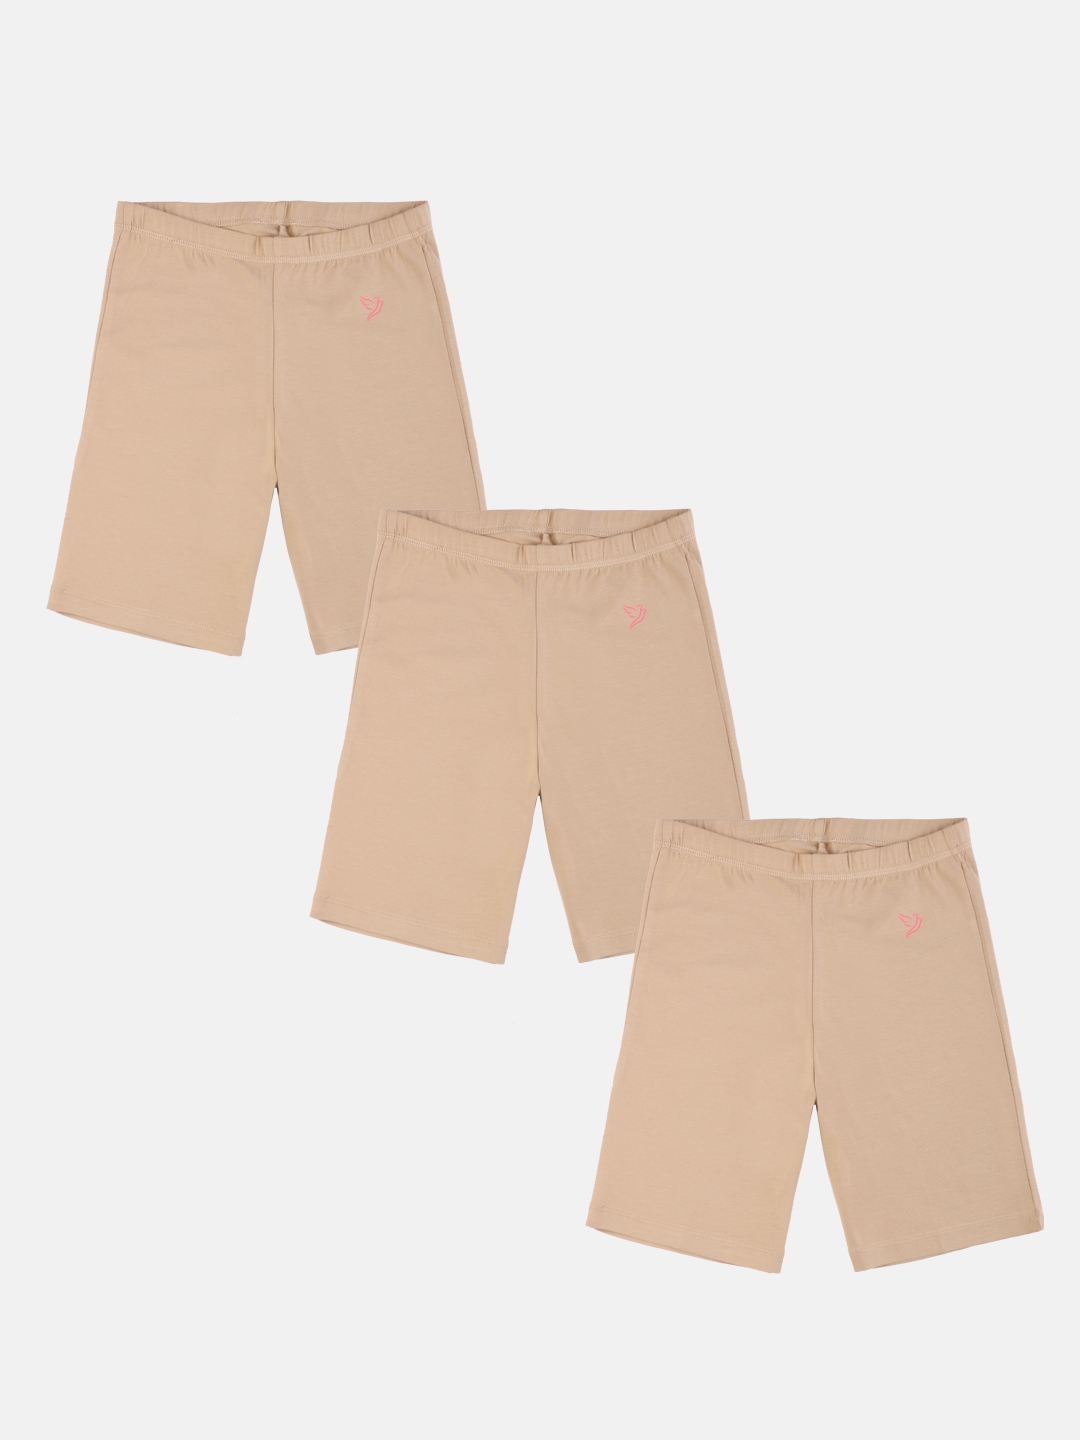 Twin Birds | TwinBirds Kids Secura Shorts Combo - Pack of 3 